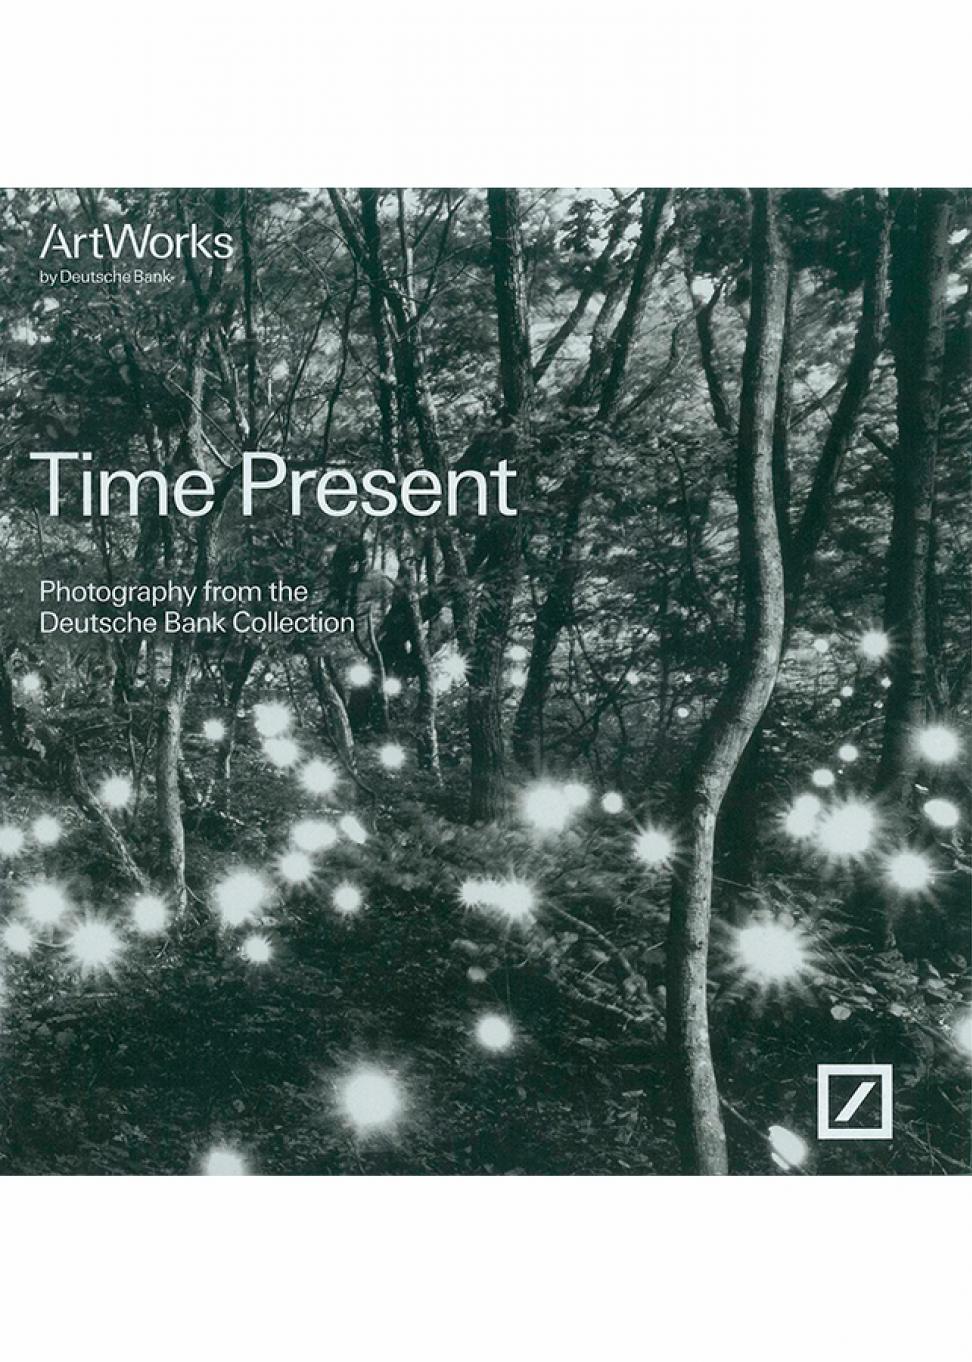 Time Present. Photography from Deutsche Bank Collection